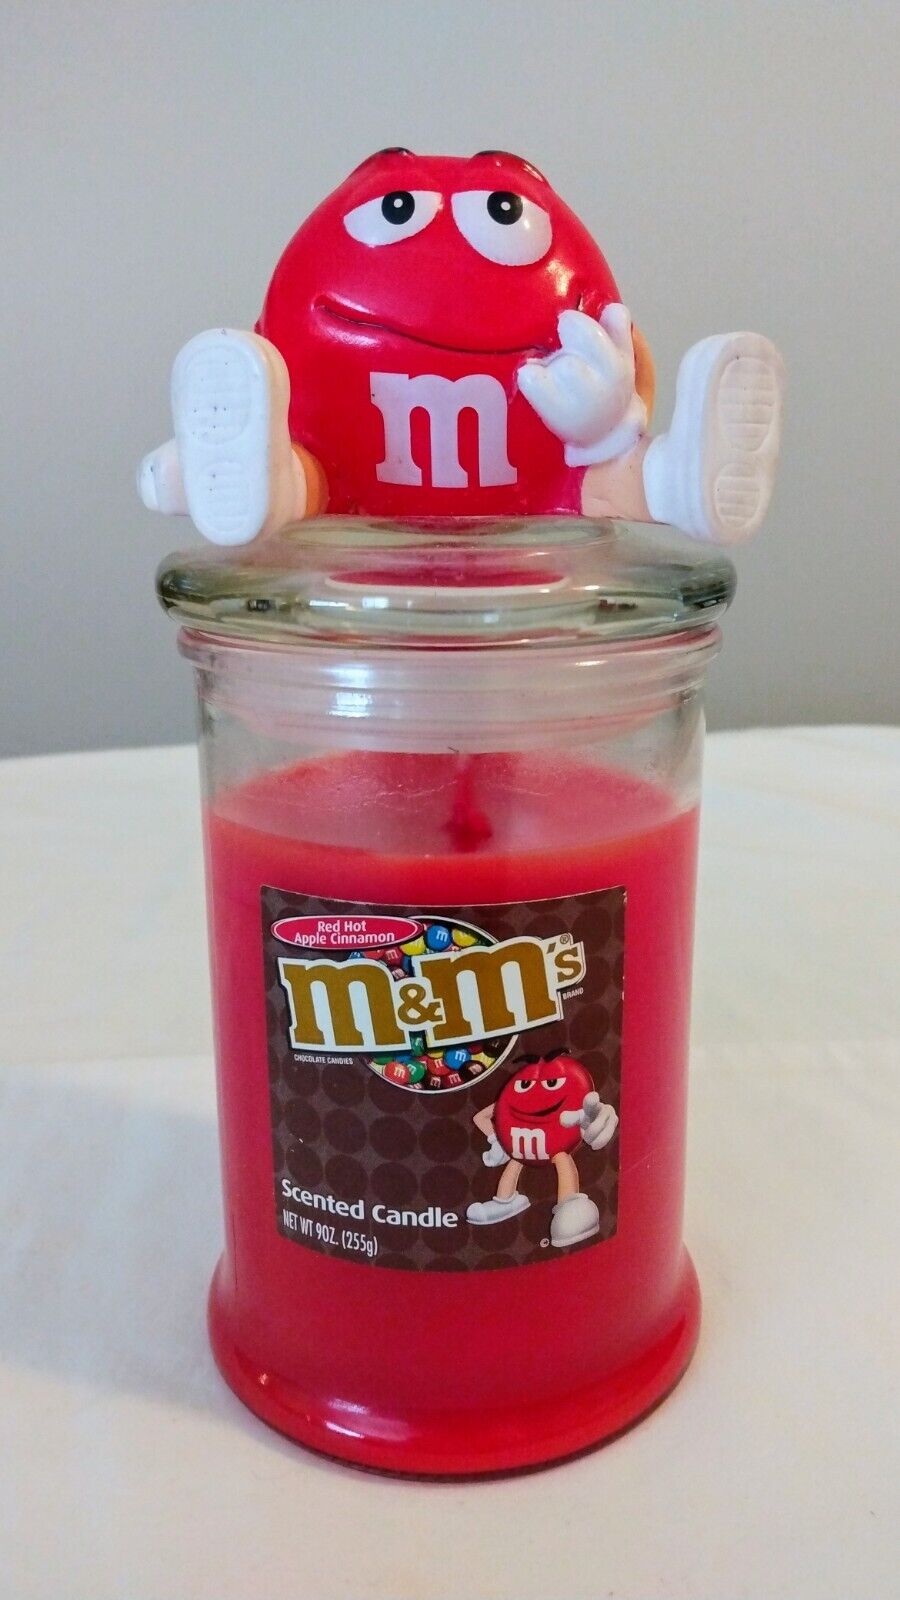 RARE M&M’s 2013 Apple Cinnamon Candle 9 oz Jar with Character Lid Made In USA